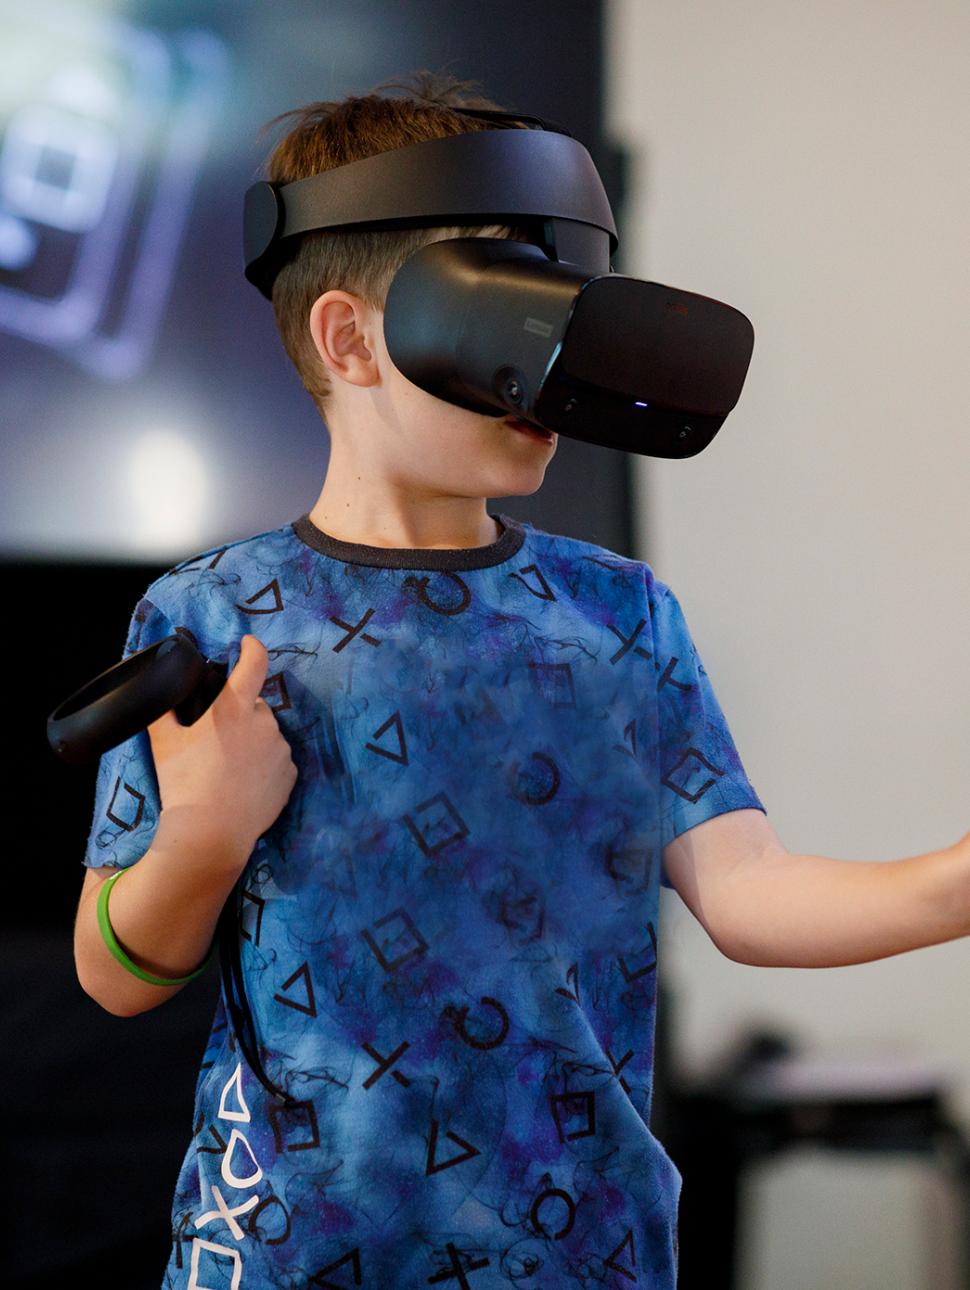 A child wearing a VR headset